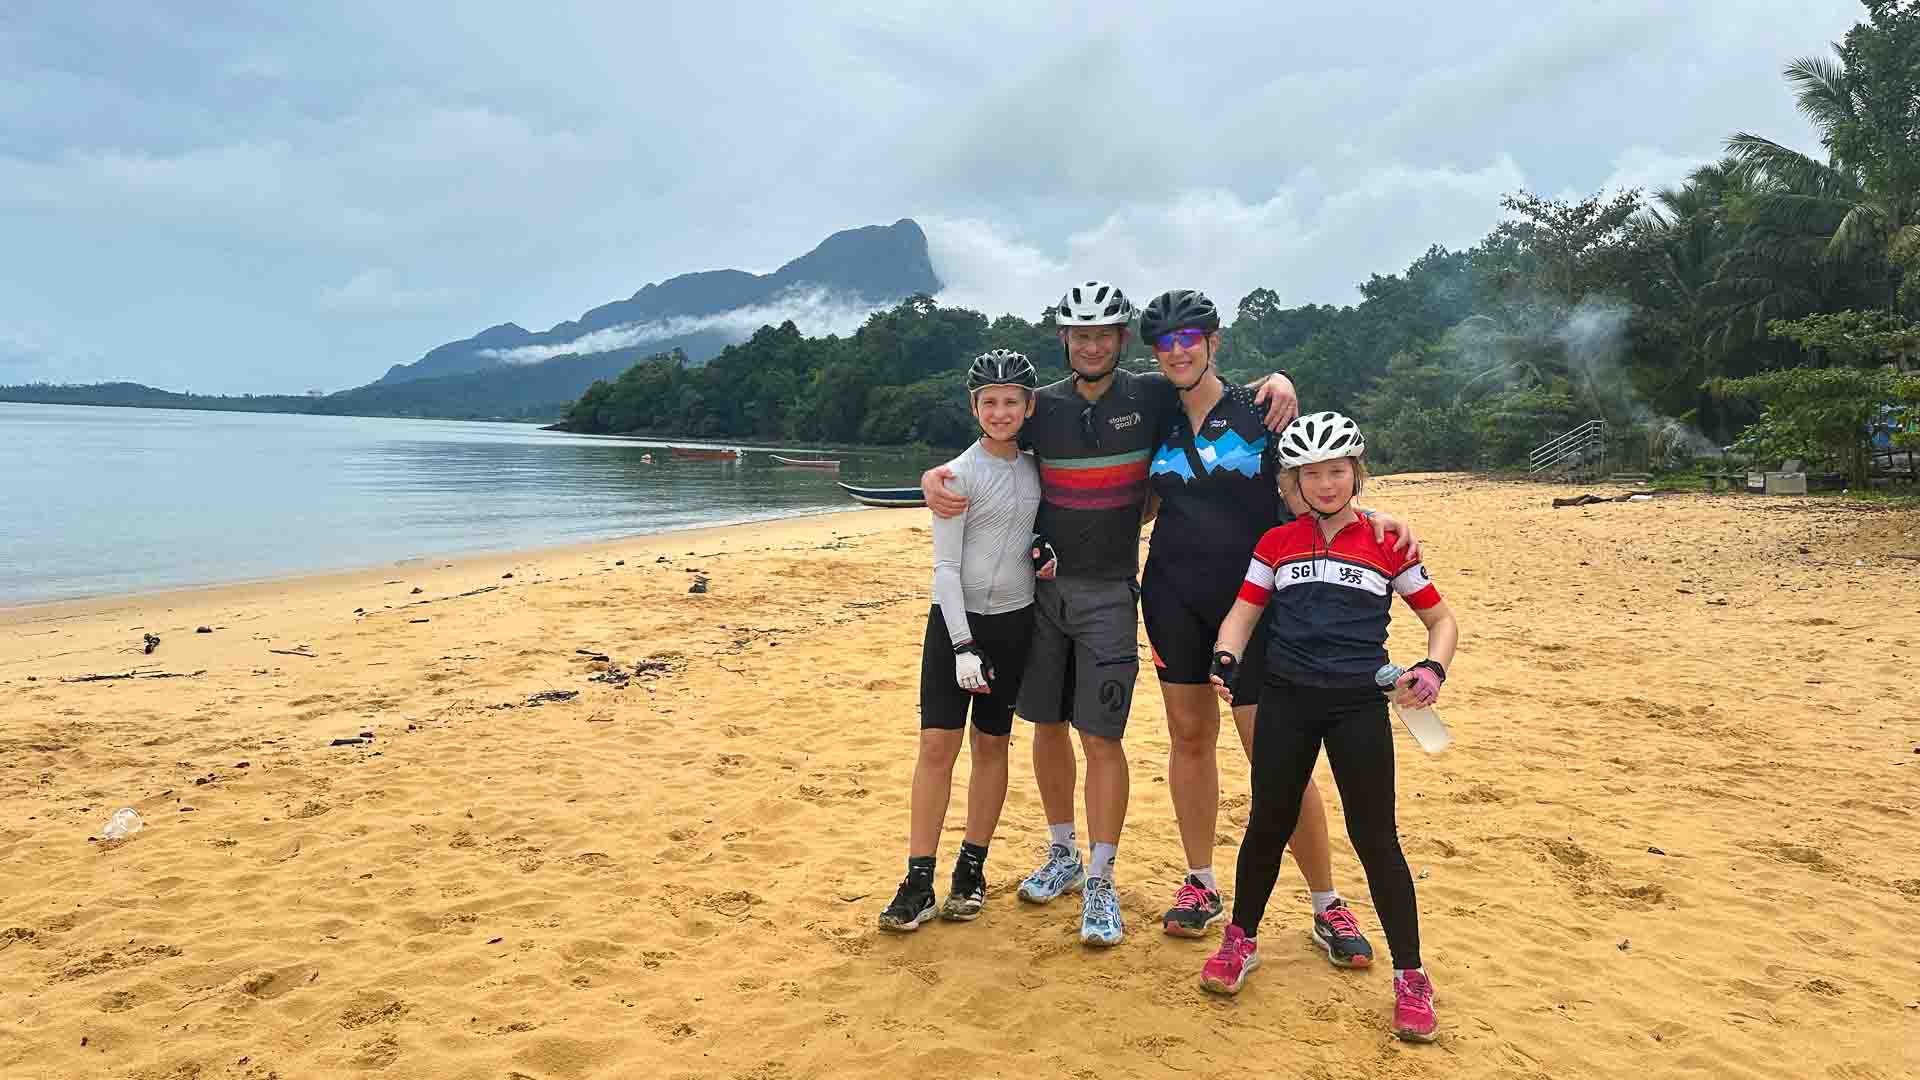 Group of cyclists on a beach in Borneo